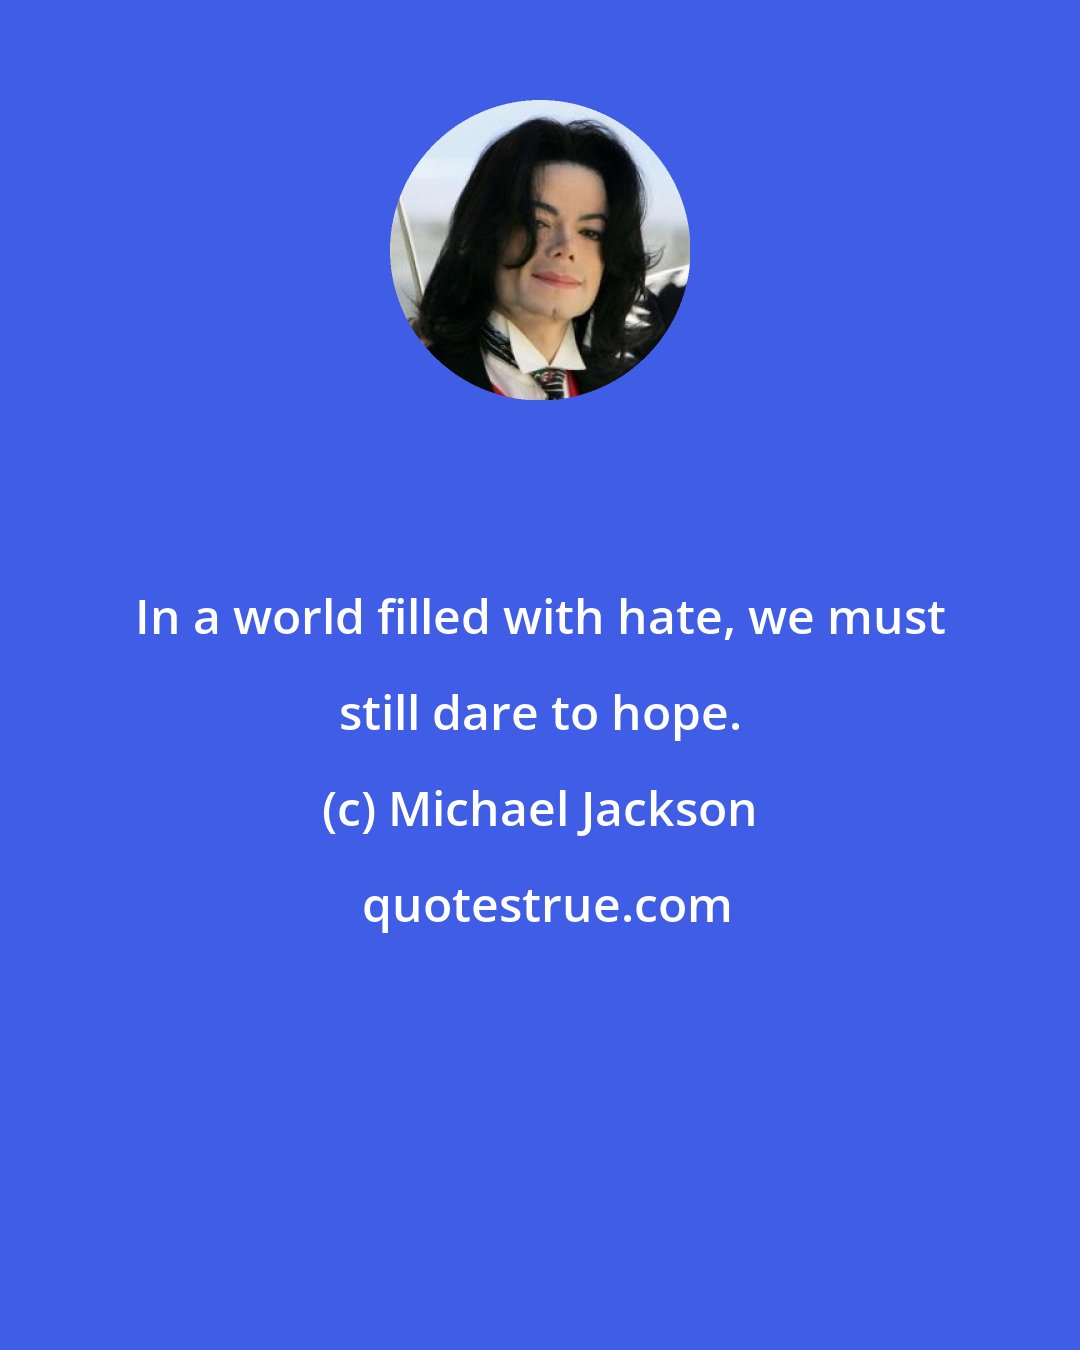 Michael Jackson: In a world filled with hate, we must still dare to hope.